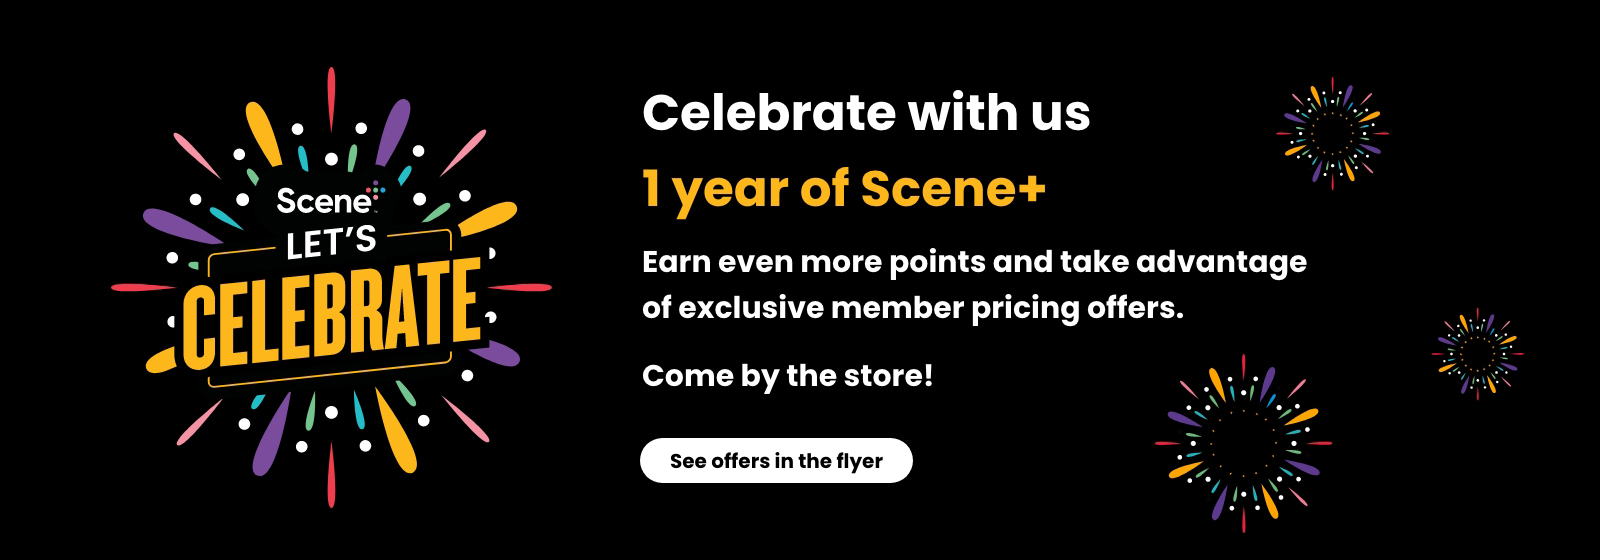 This image has the following text, "Celebrate with us 1 Year of Scene+, Earn even more points and take advantage of exclusive member pricing offers. Come by the store! Along with the 'See offers in the flyer' button."